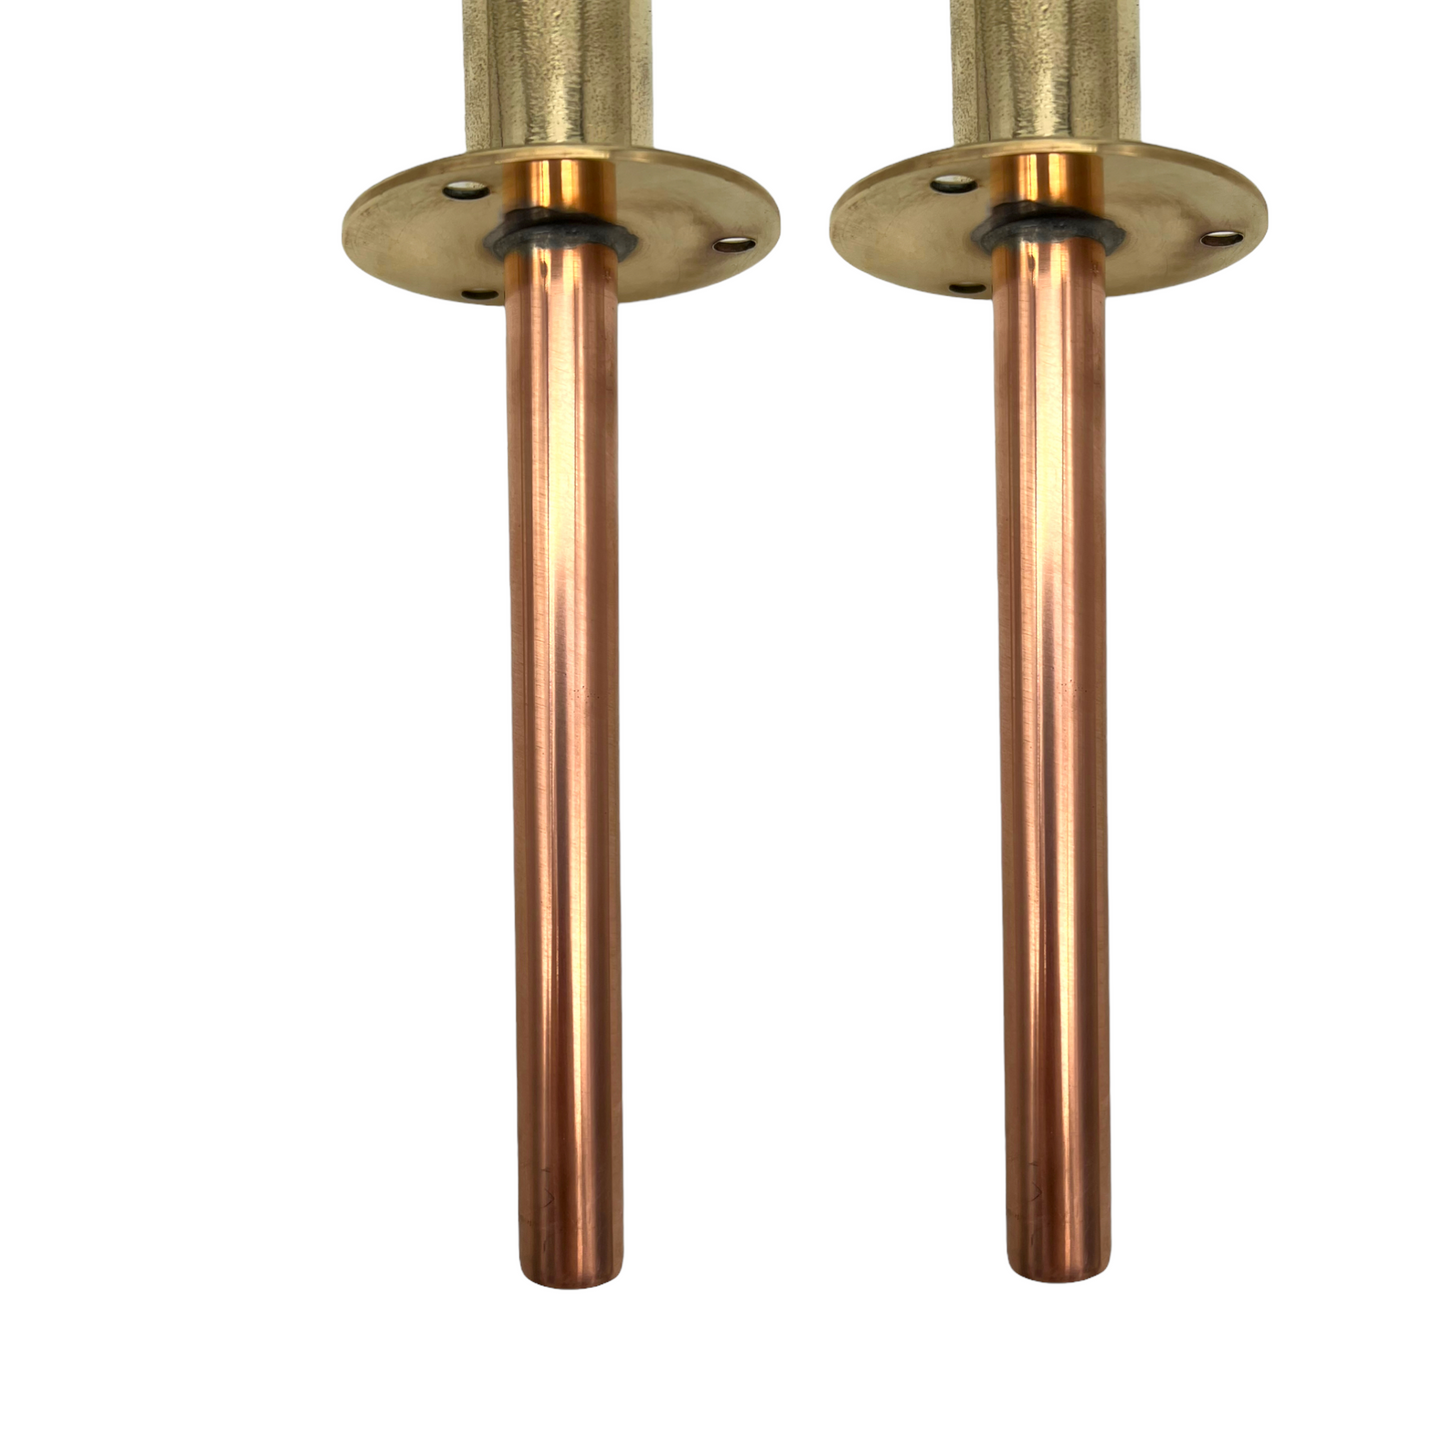 Victorian Style Brass and Copper Taps, Copper and Brass Kitchen Taps (T5)